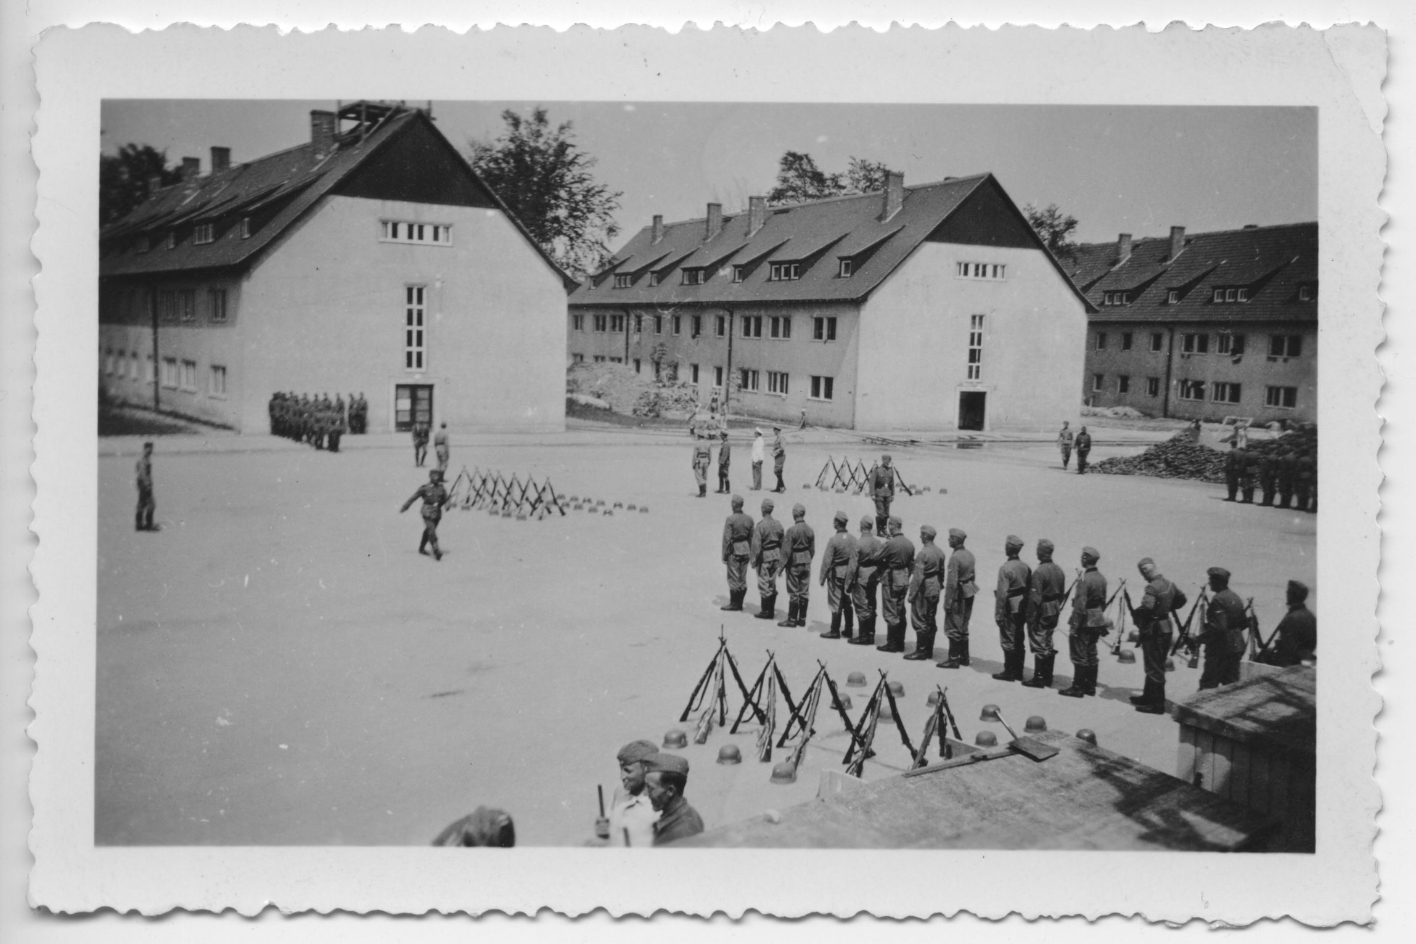 SS members of Totenkopf-Standarte 14 during drill exercises on the parade ground. The men are standing in rows. Rifles are leaning against each other on the ground and helmets are lying next to them. Three Hundertschaftskasernen can be seen in the background.